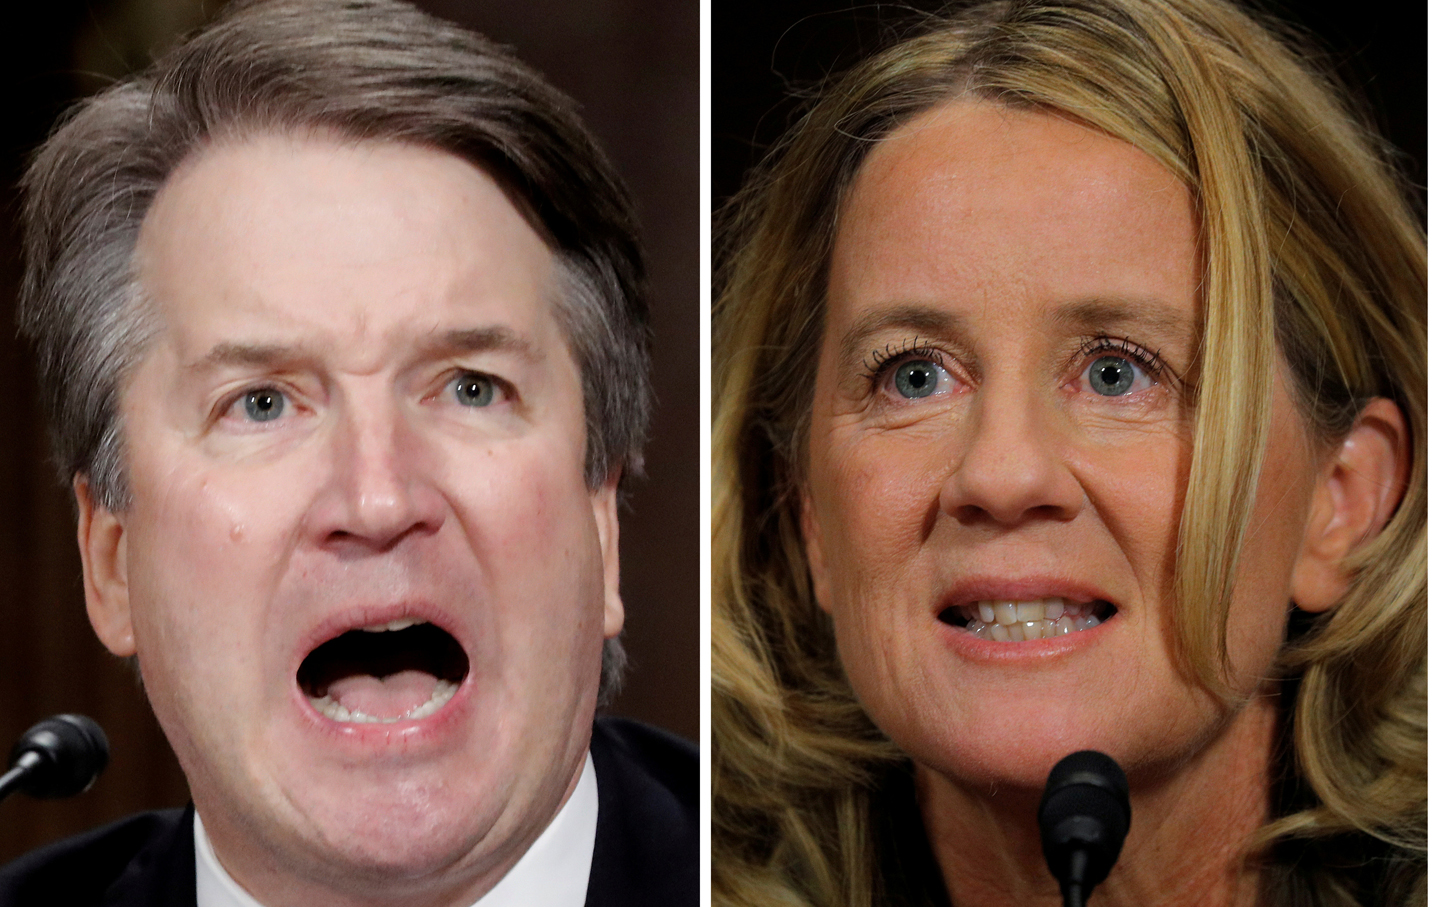 These Senators Need to Be Told: Do Not Vote for Kavanaugh